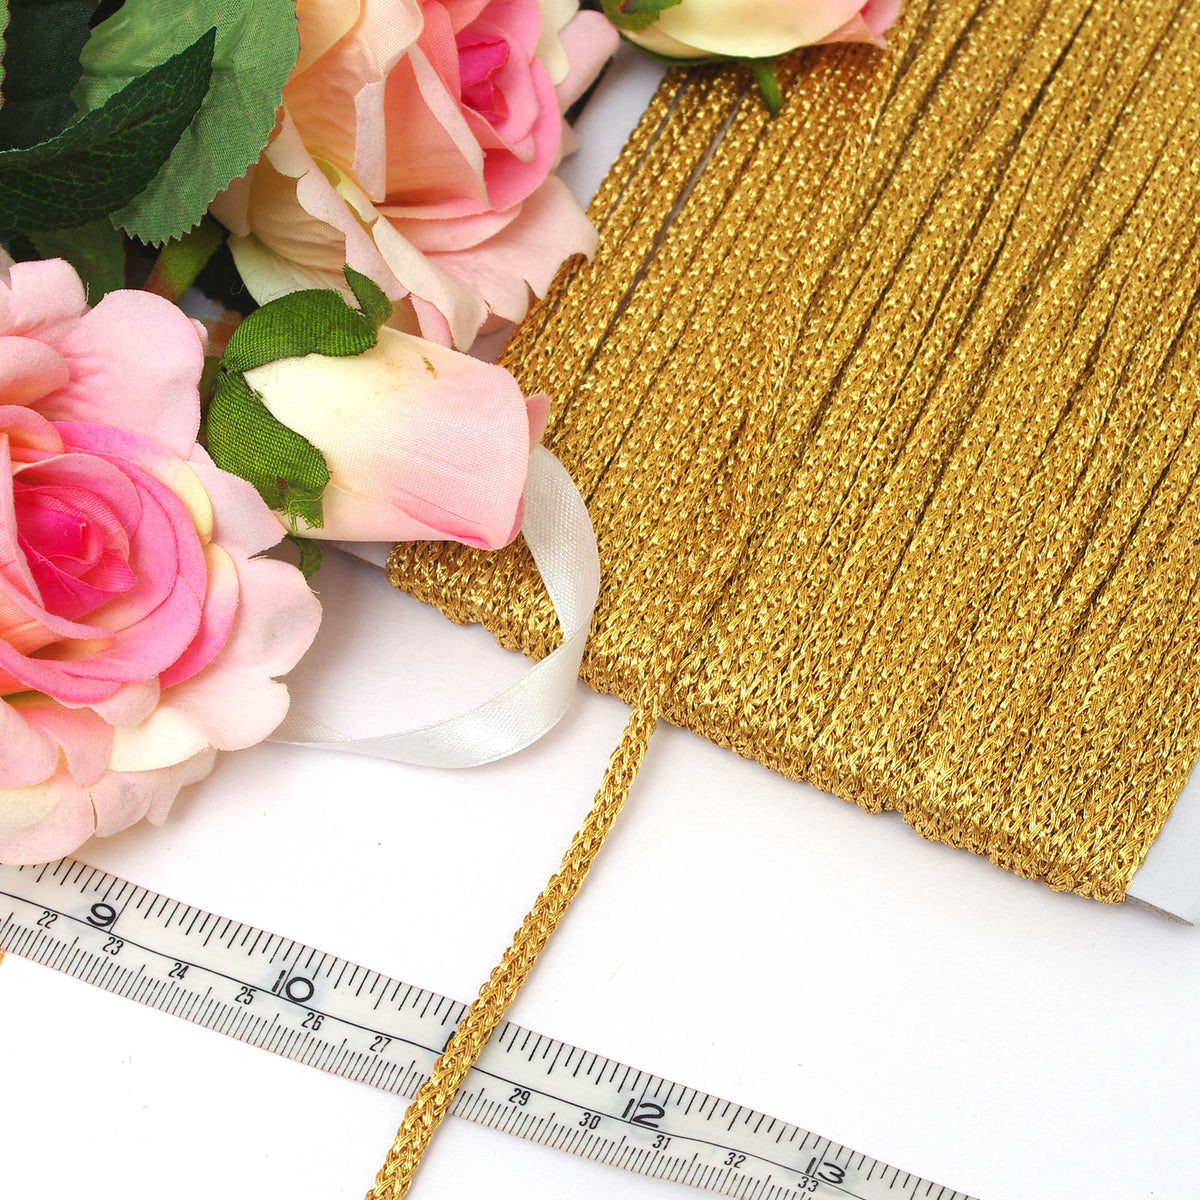 Zari Gold Rope Style Lace Braided Trim By The Meter